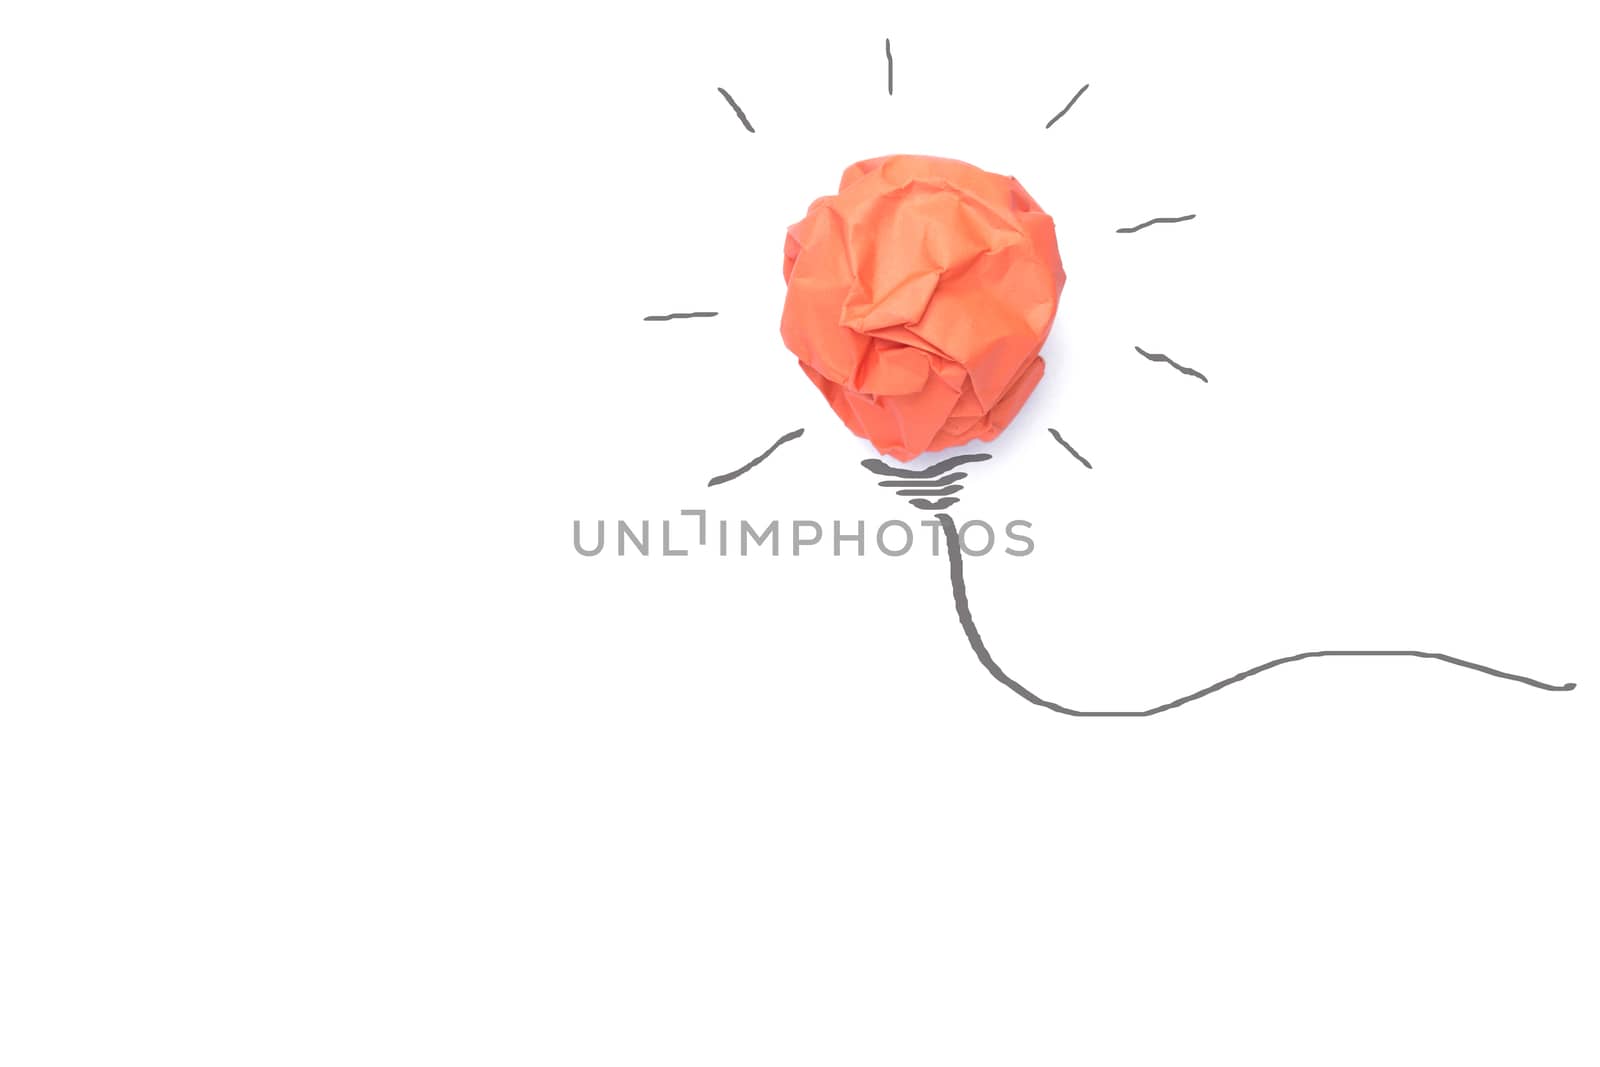 Concept idea with paper light bulb isolate on white background by kirisa99